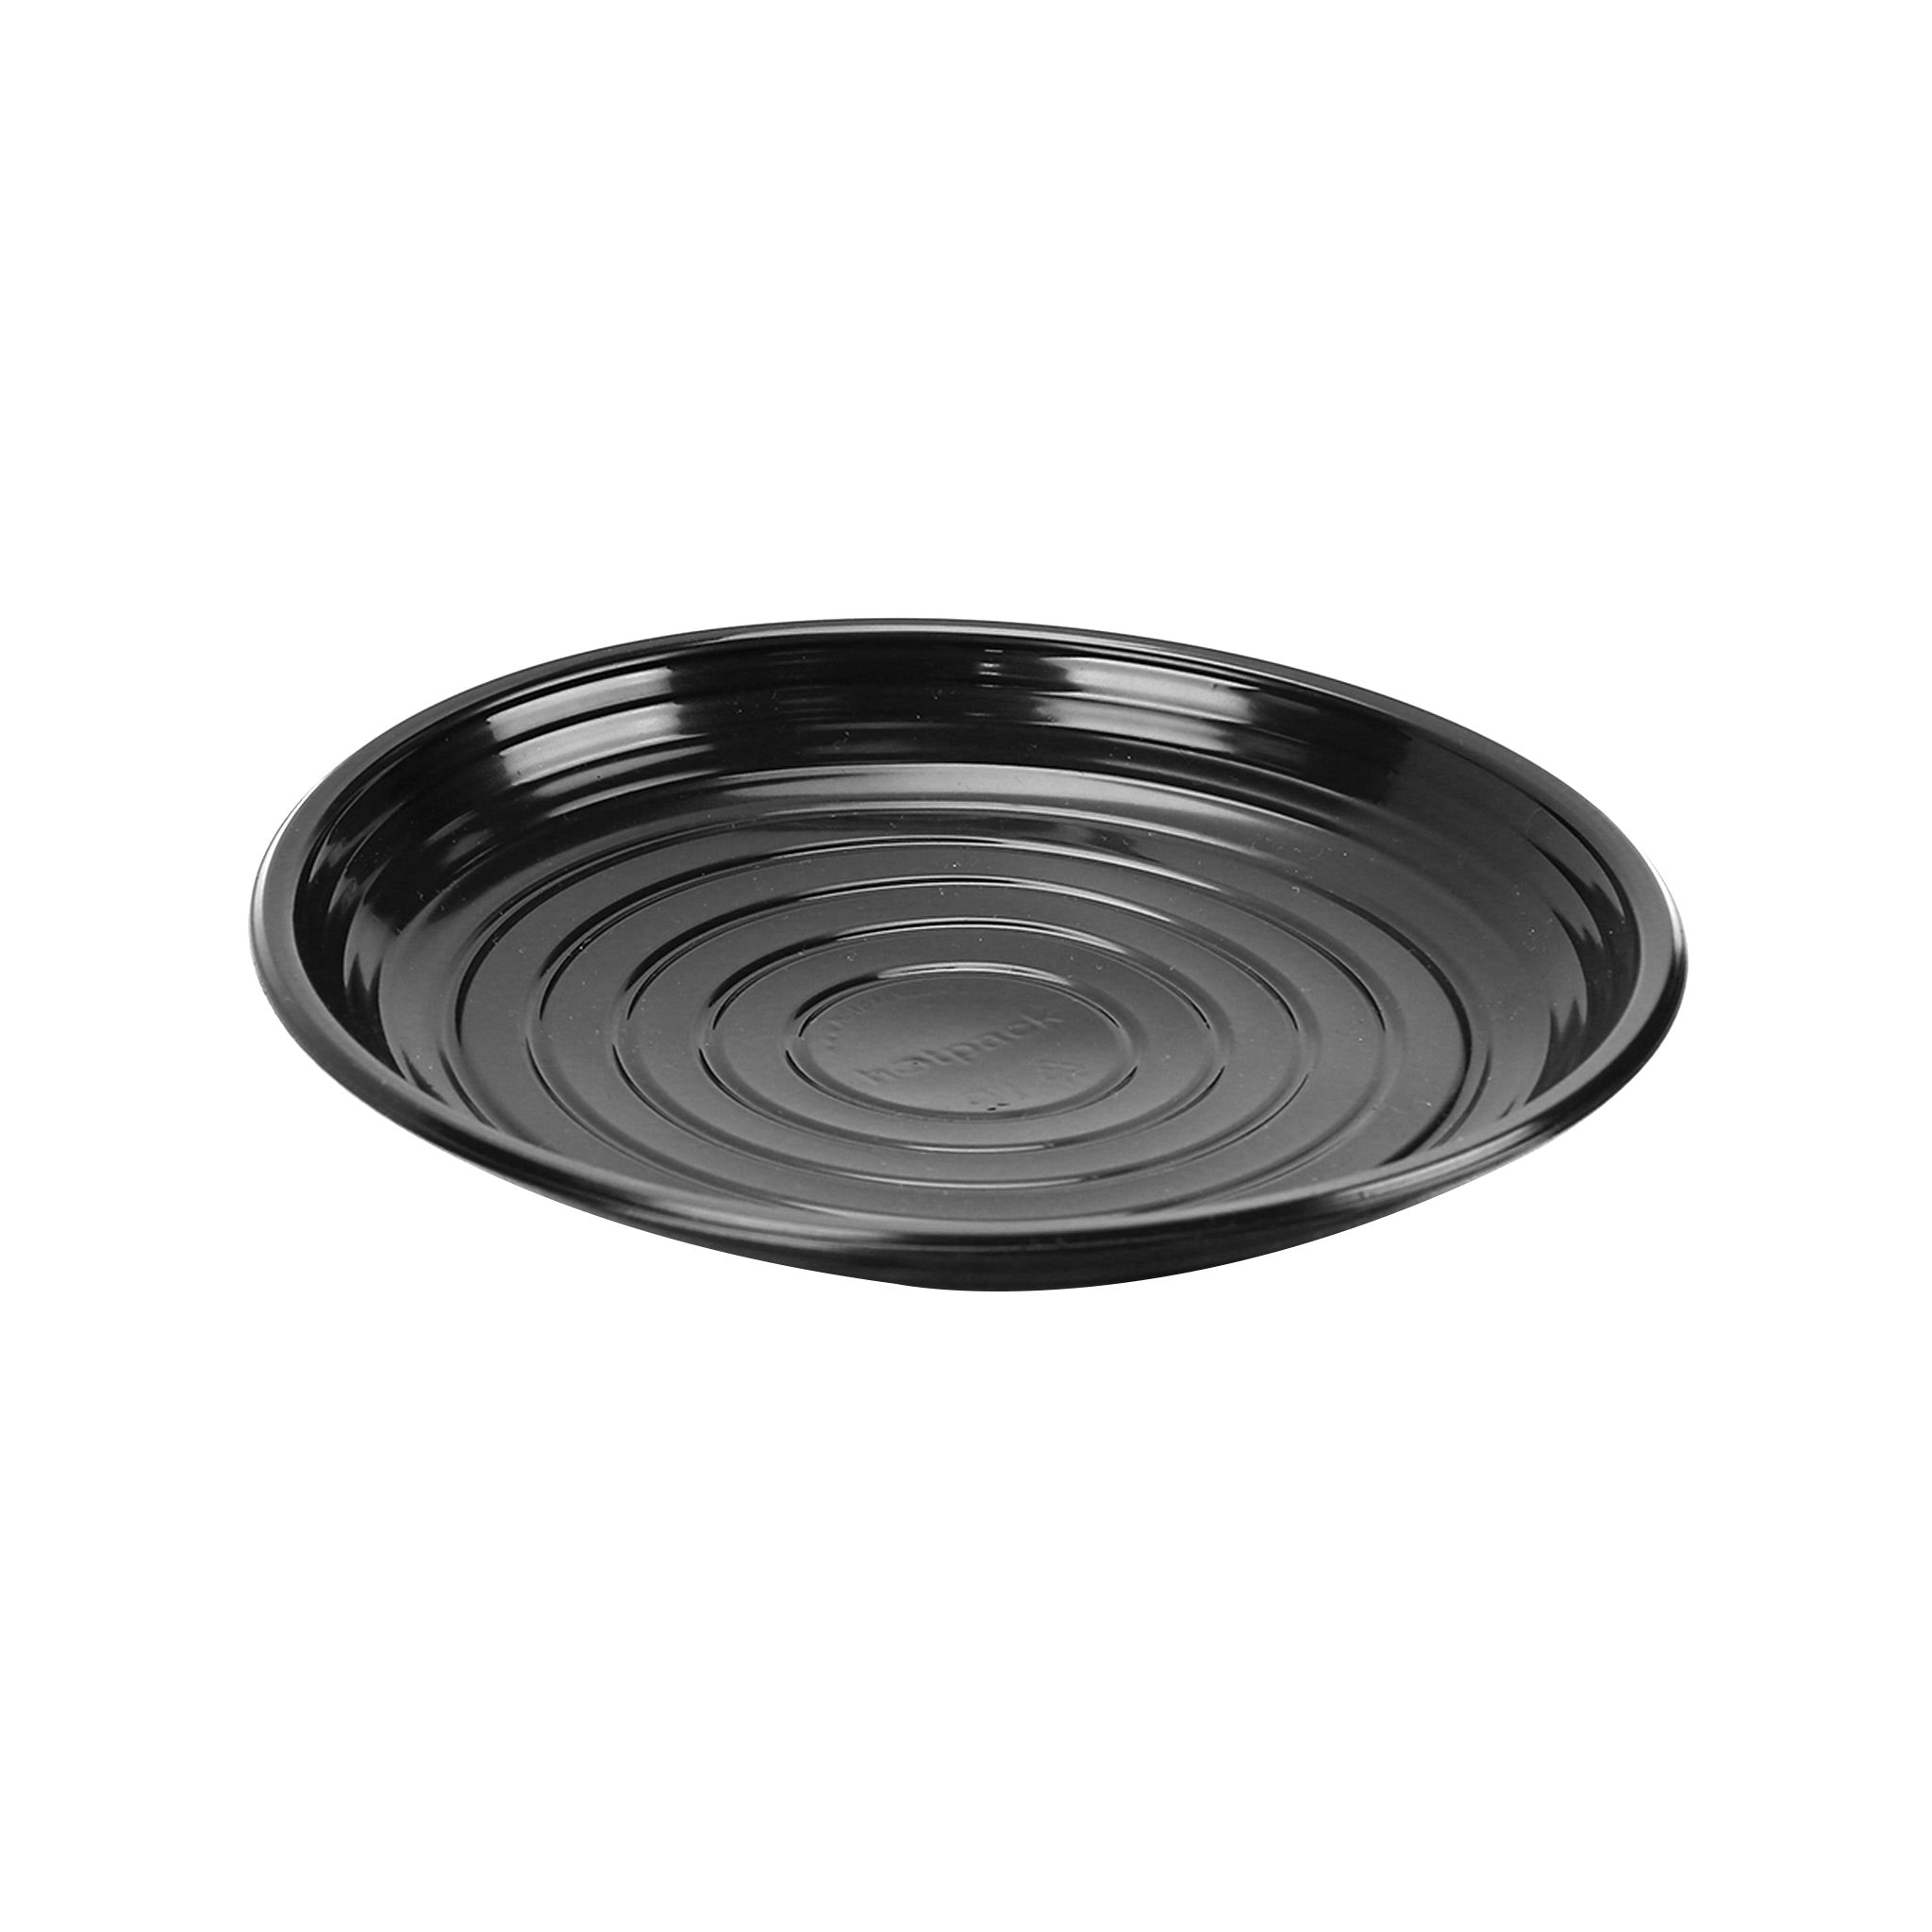 150 Pieces Plate, Microwave Safe, 9' - Hotpack Bahrain